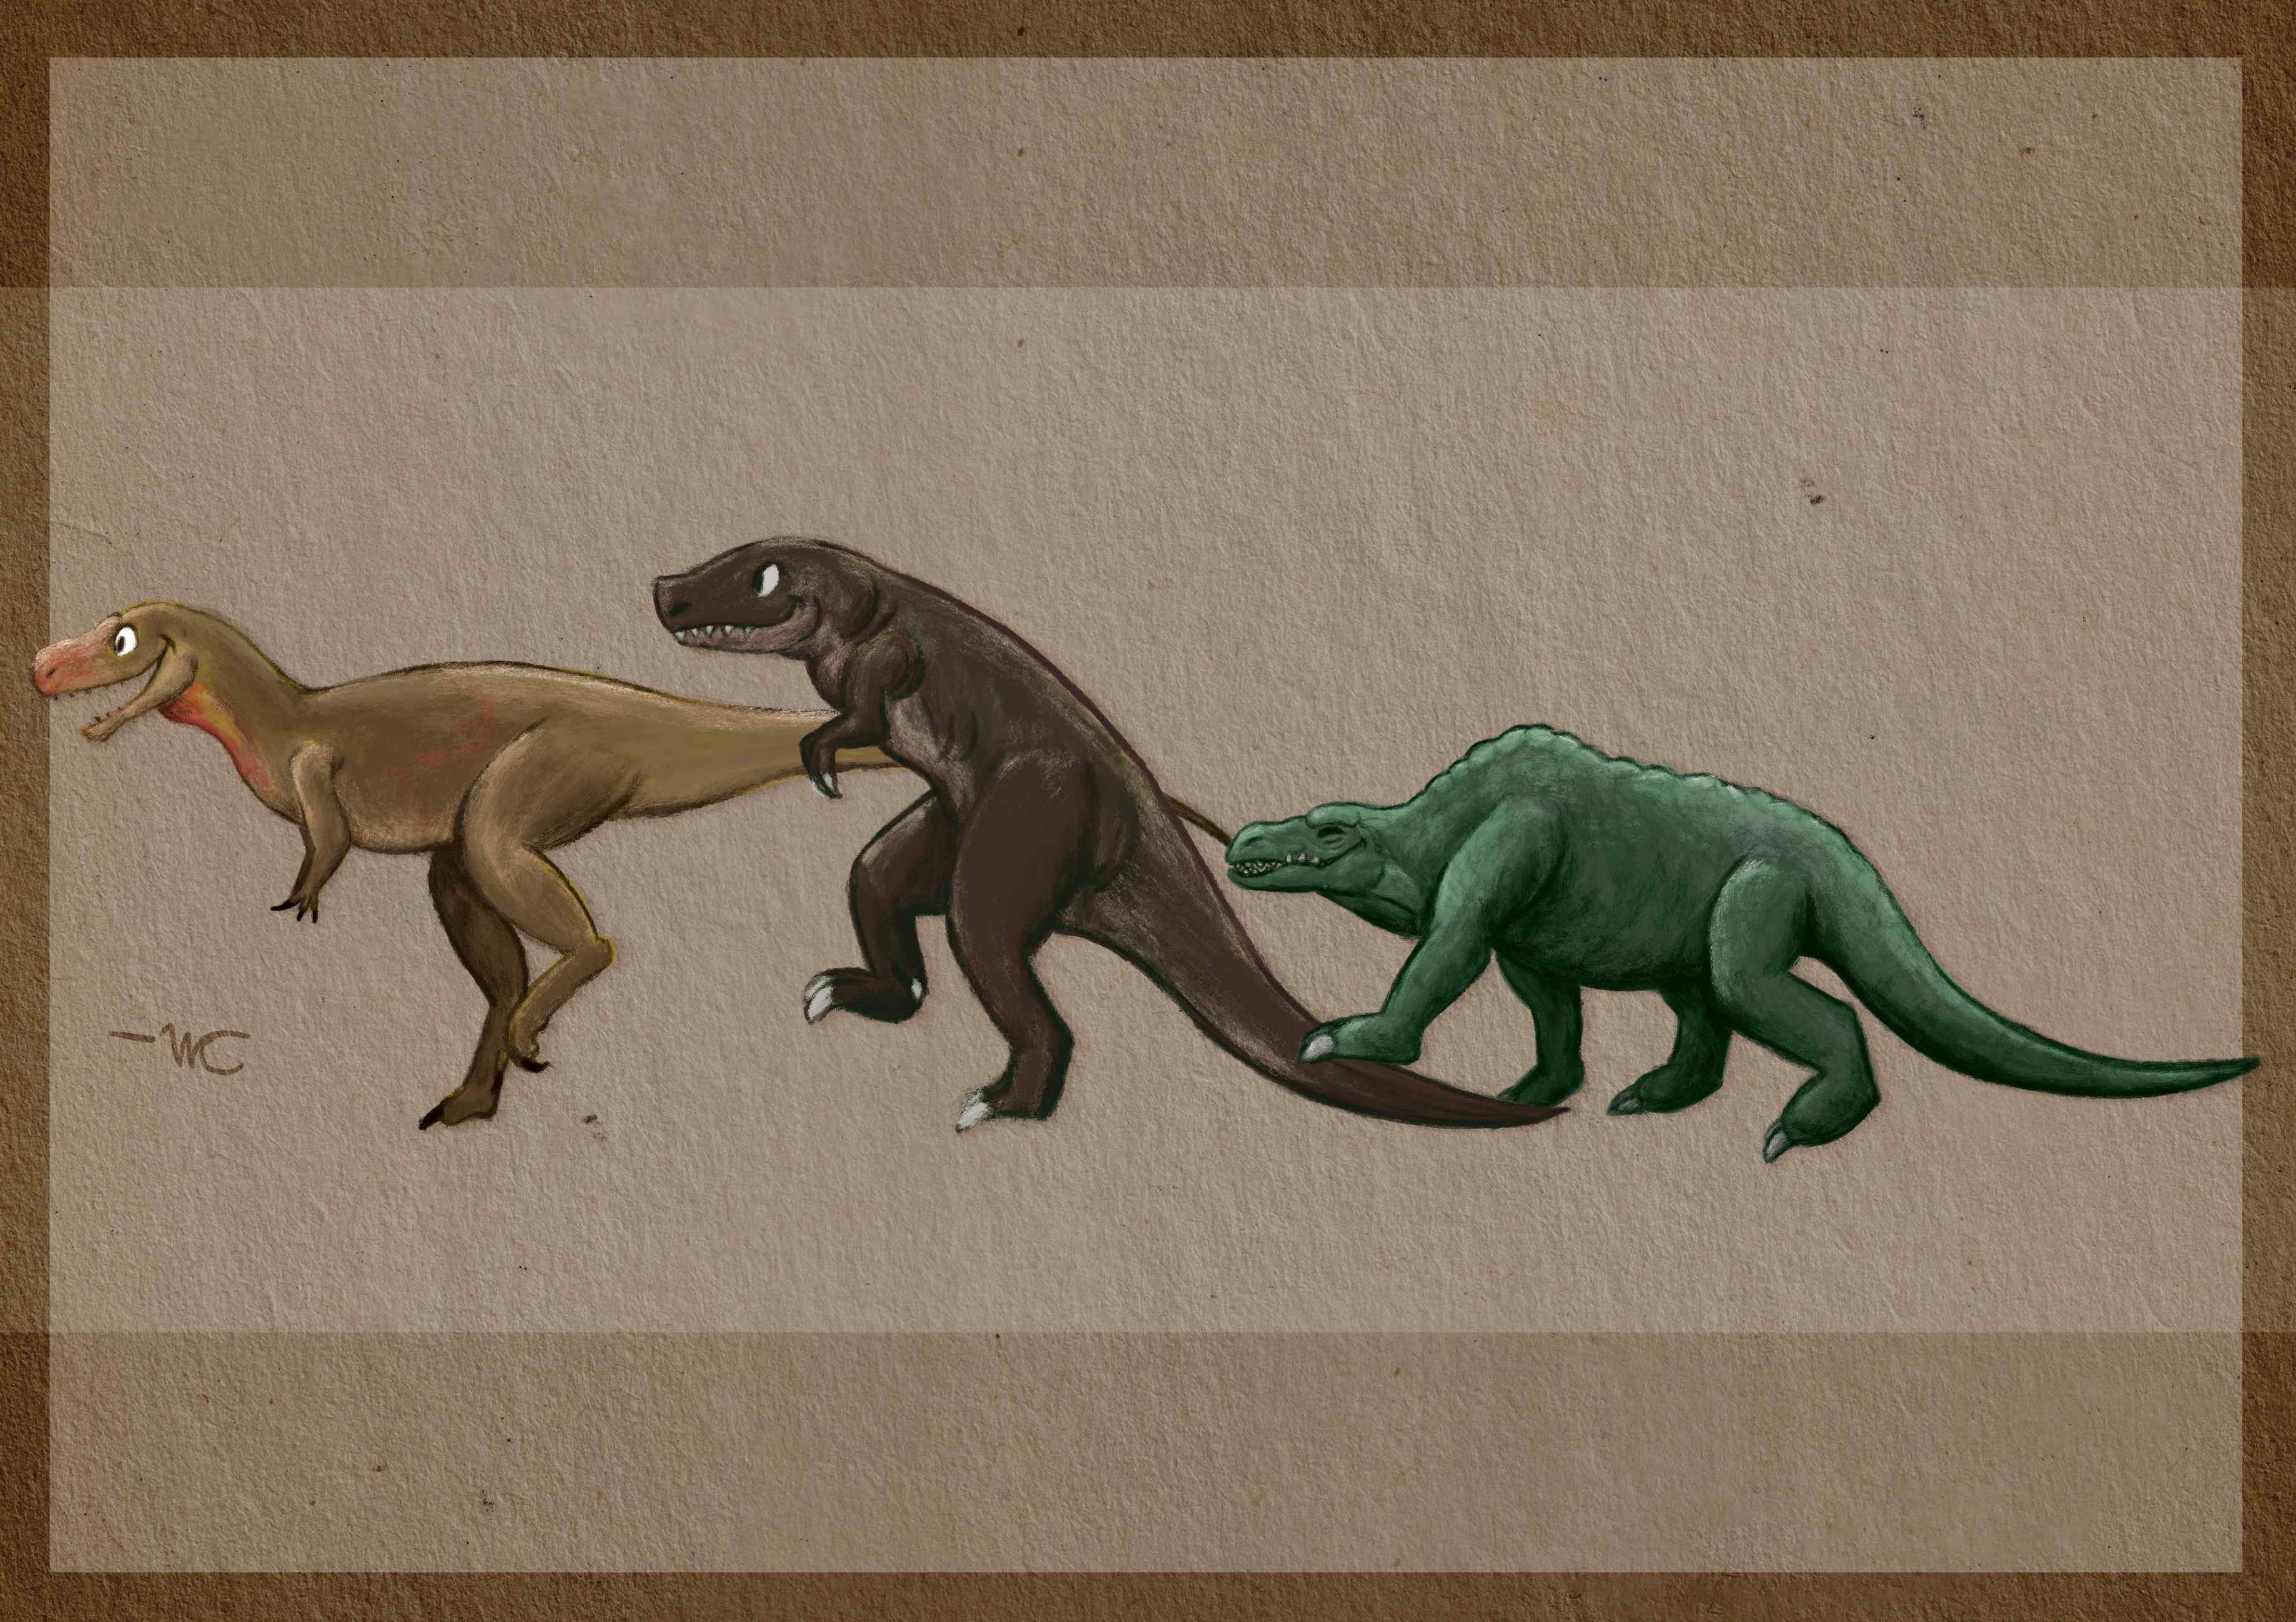 Three cartoon drawings of Megalosaurus bucklandii as it has appeared throughout our history. They are marching together towards the left of the page. The one on the far right is the Crystal Palace Megalosaurus and is green. In the middle is a retro bipedal depiction of the dinosaur with its hands pointed downwards. It's a dark brown colour with hints of green. The last Megalosaurus is drawn based on our modern understanding of the animal. It is a light brown, with spots of red colour on its nose and neck. They all look happy. The background is a simple brown paper texture with a border. 